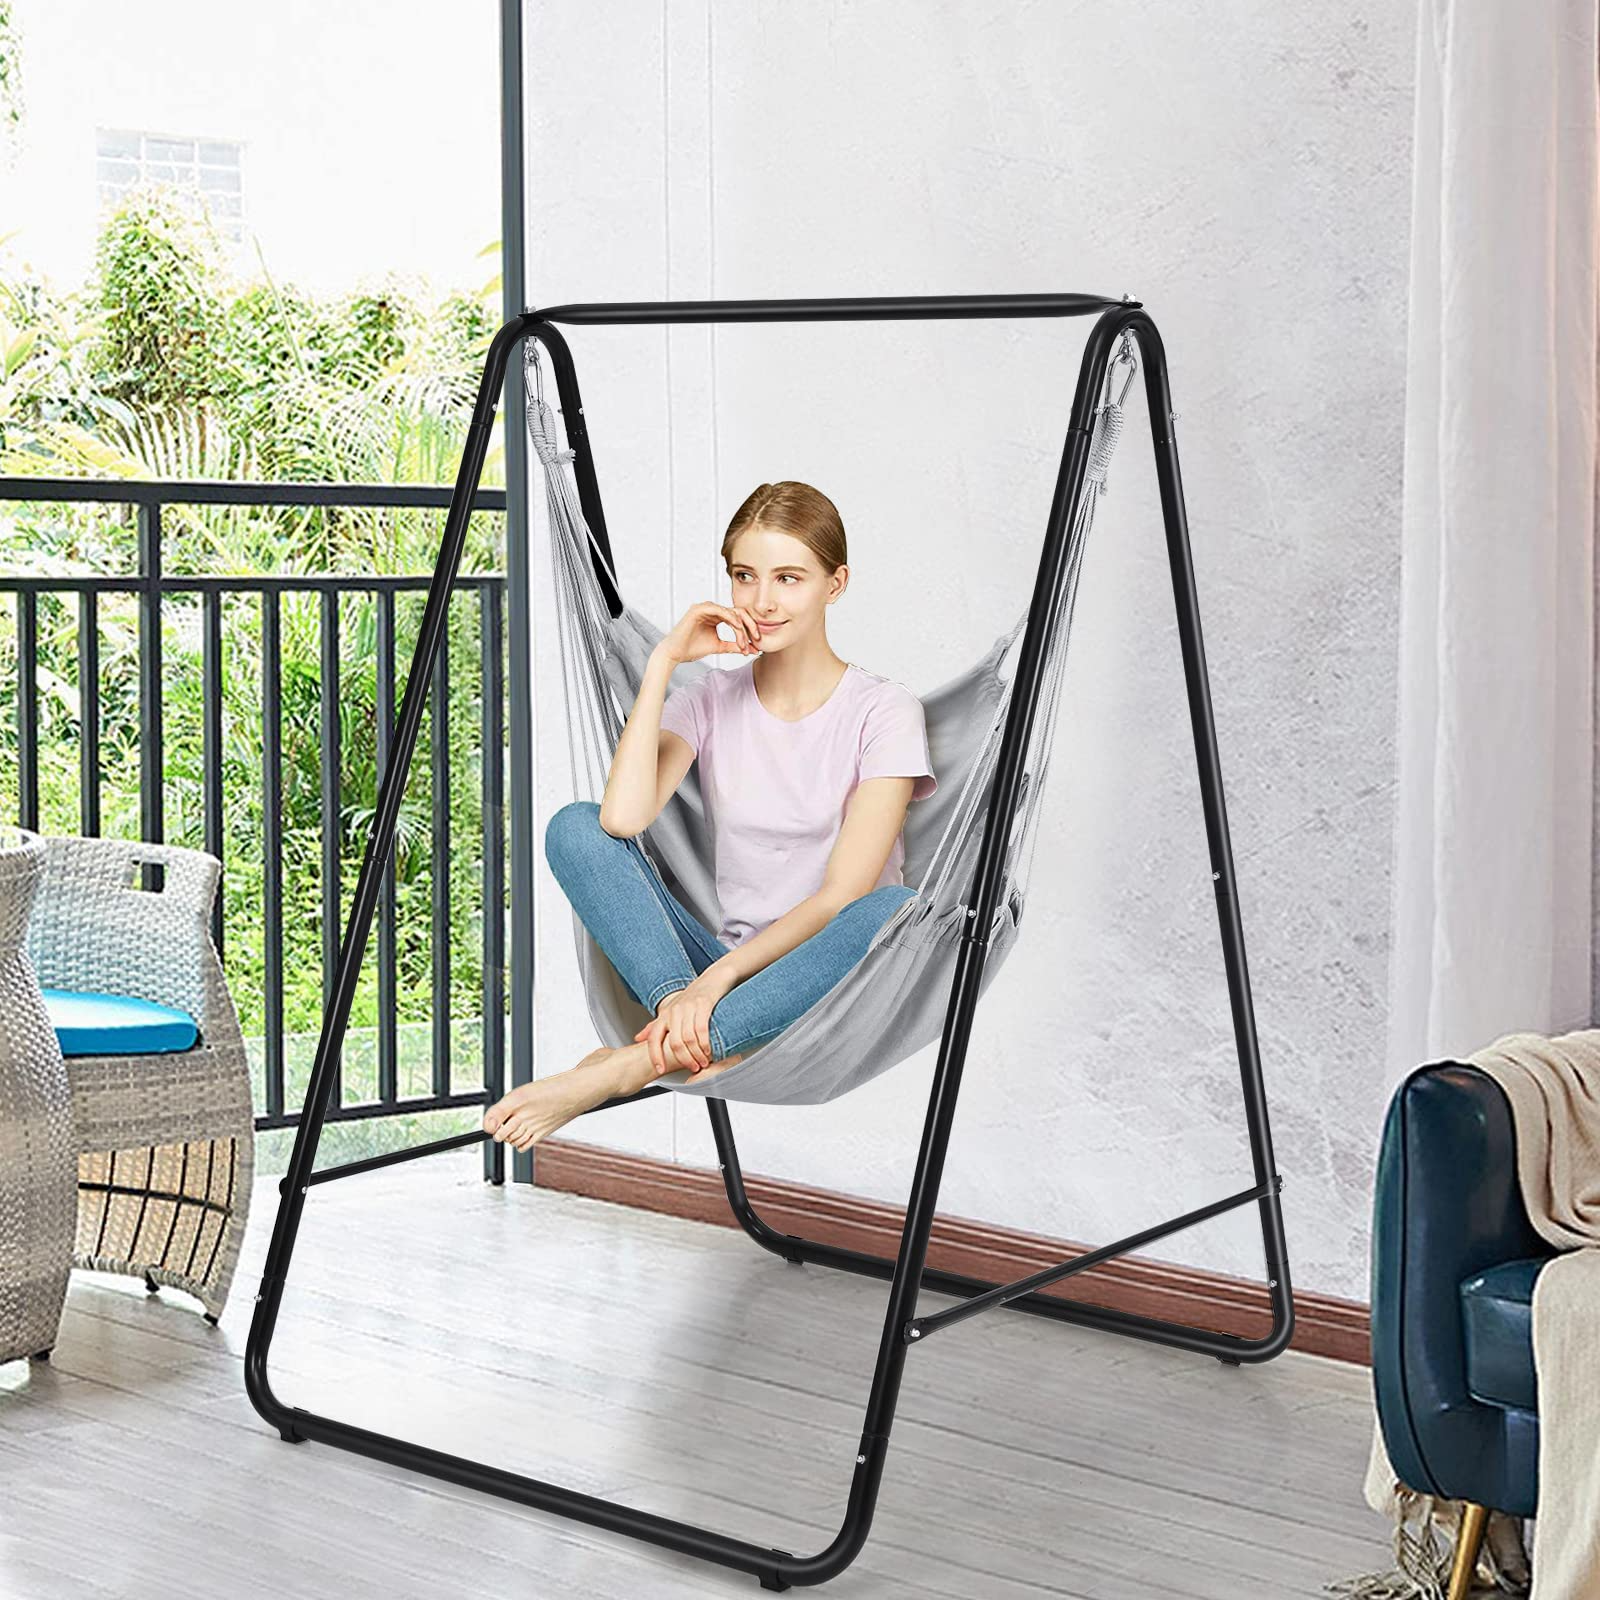 Heavy-Duty Powder-Coated Steel Stand with Hanging Swing Chair